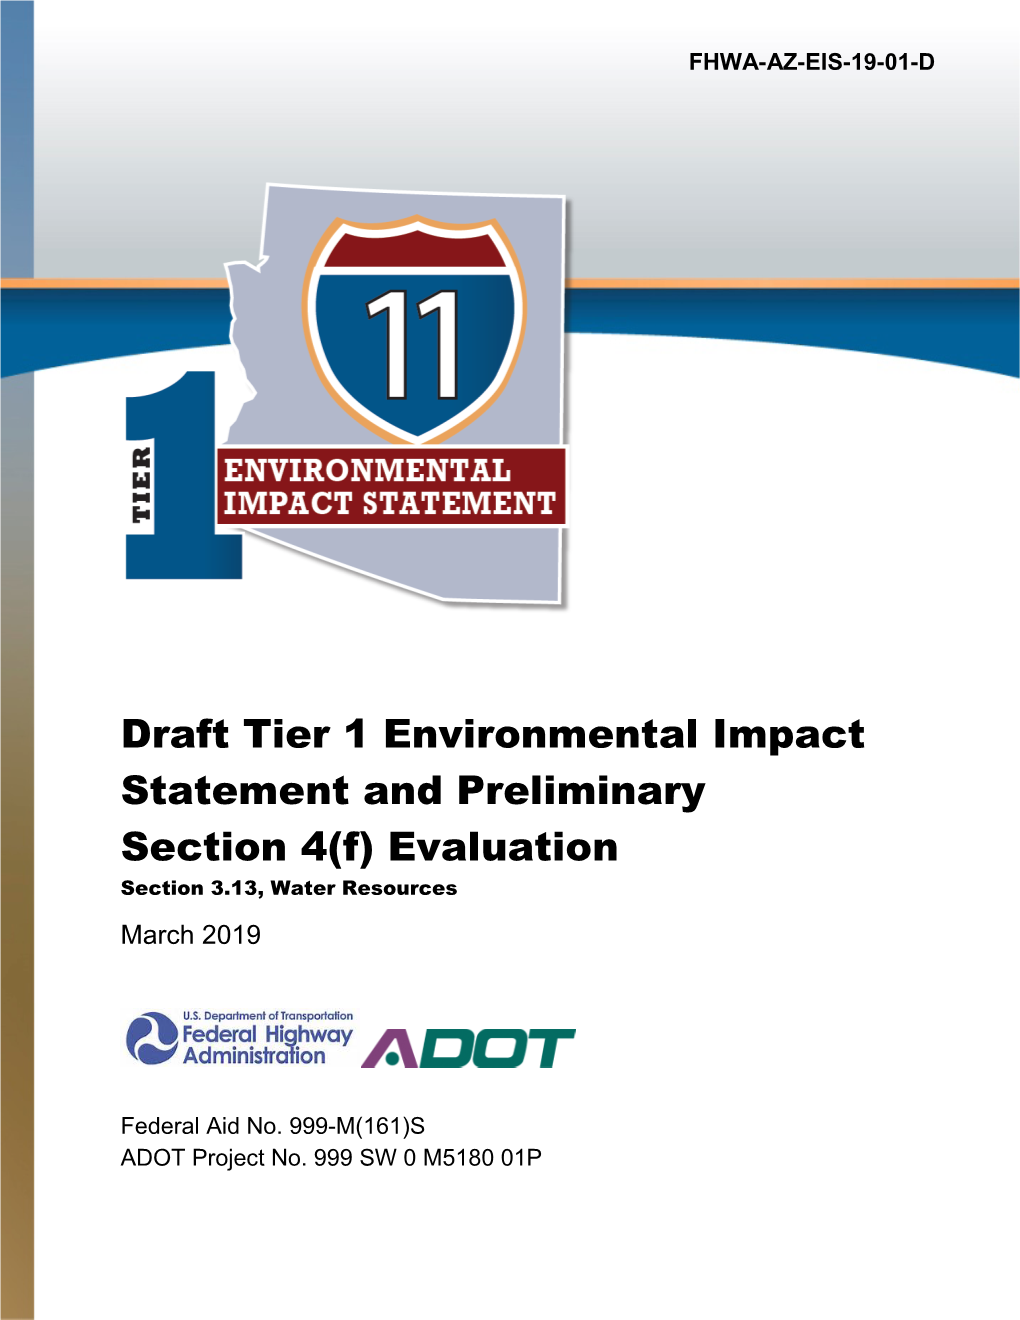 Draft Tier 1 Environmental Impact Statement and Preliminary Section 4(F) Evaluation Section 3.13, Water Resources March 2019